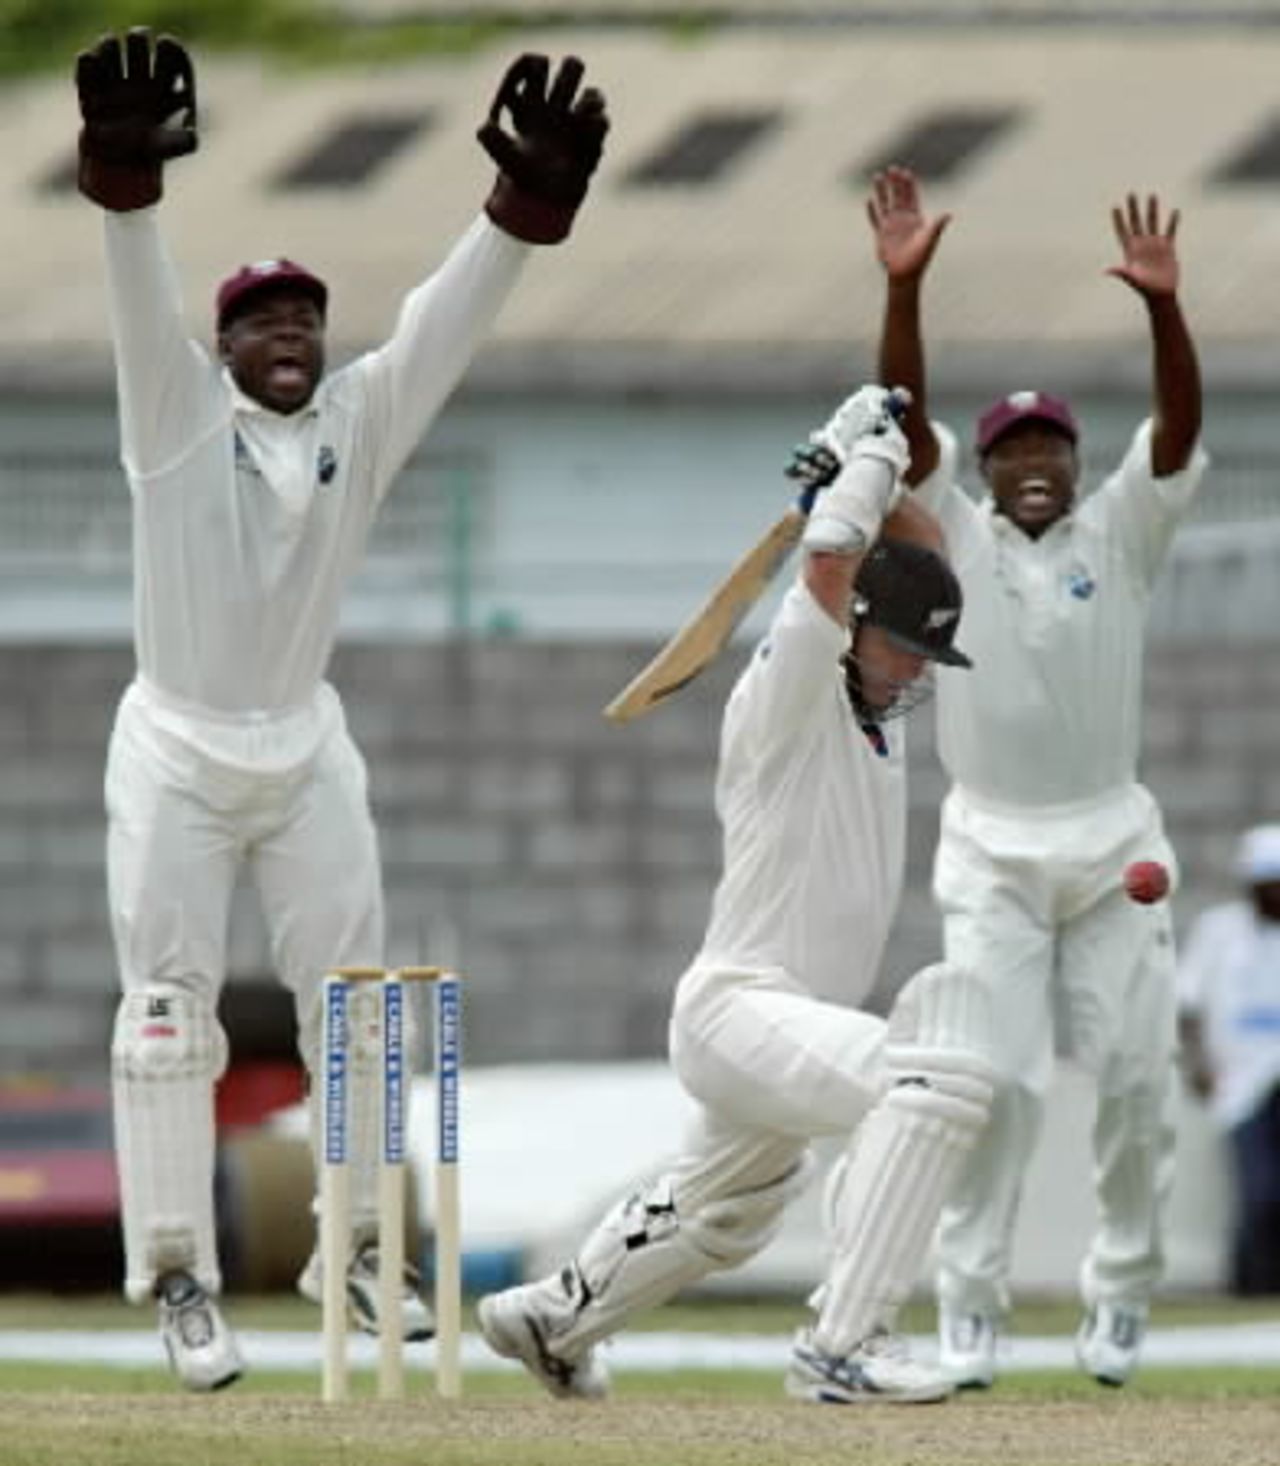 New Zealand batsman Mark Richardson survives an lbw appeal from West Indies wicket-keeper Ridley Jacobs and slip fielder Brian Lara from the bowling of Mahendra Nagamootoo. Richardson went on to score 95 in his first innings. 2nd Test: West Indies v New Zealand at Queen's Park, St George's, Grenada, 28 June-2 July 2002 (28 June 2002).